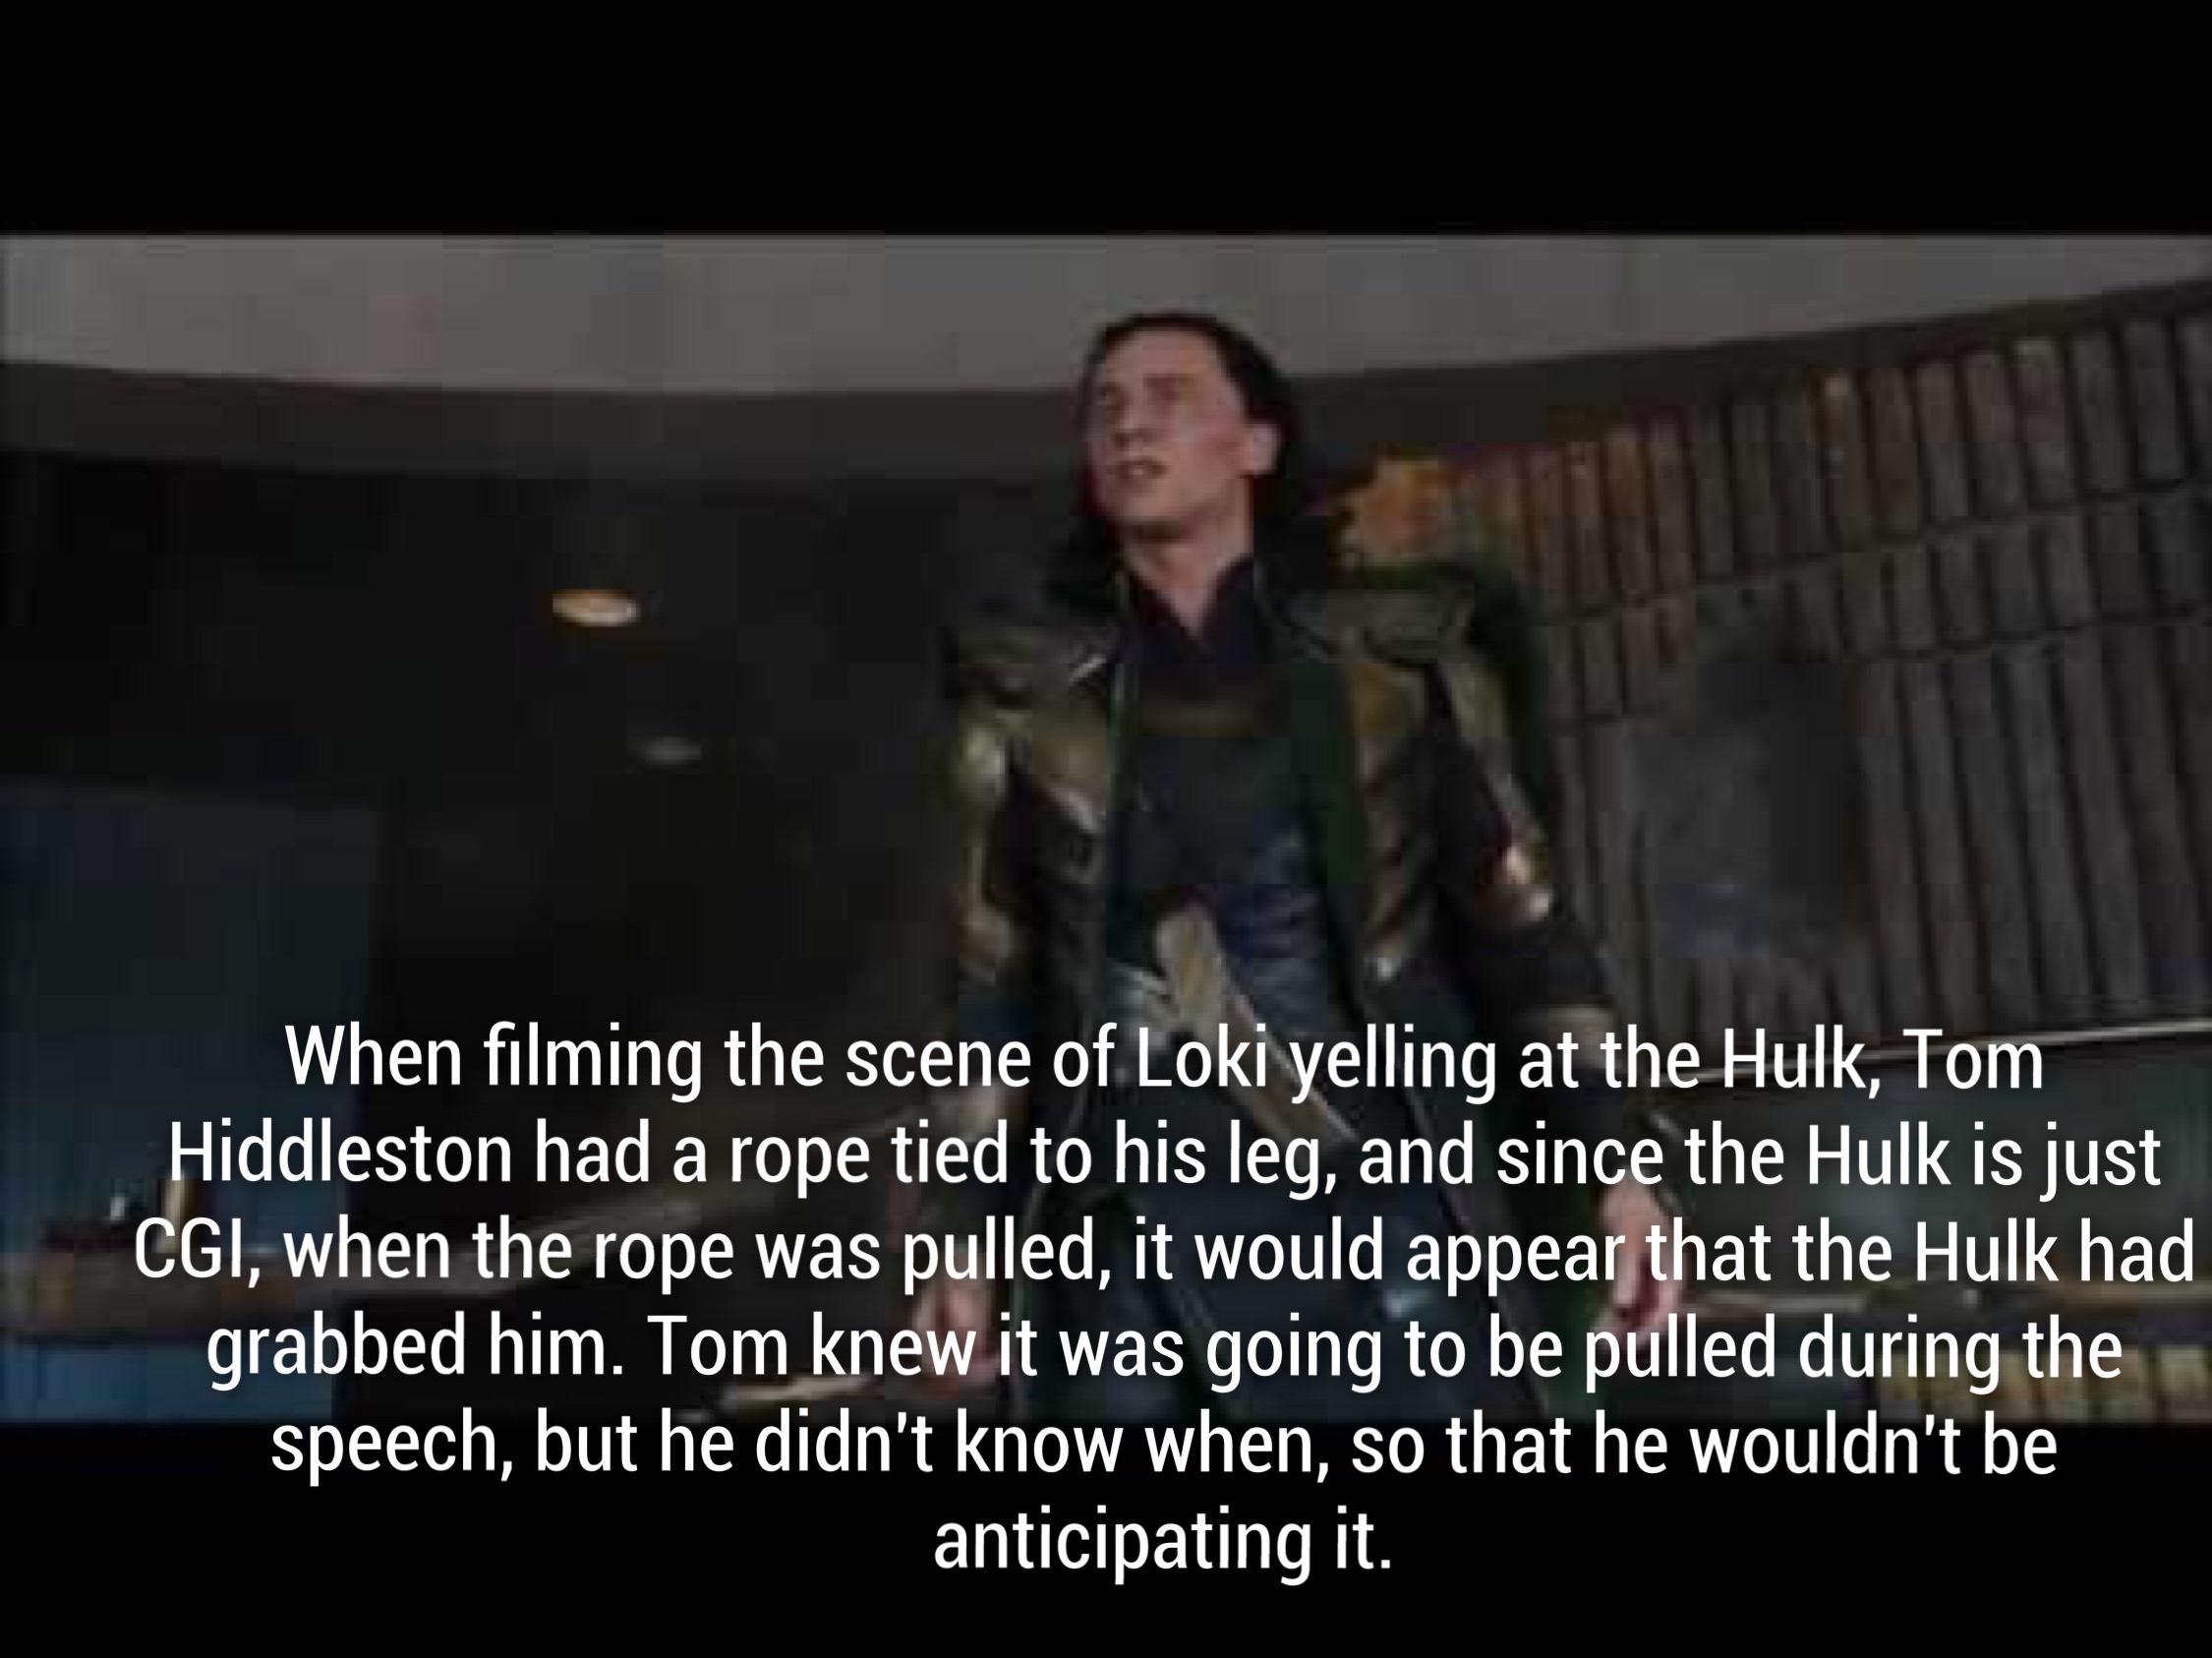 avengers amazing facts - When filming the scene of Loki yelling at the Hulk, Tom Hiddleston had a rope tied to his leg, and since the Hulk is just Cgi, when the rope was pulled, it would appear that the Hulk had grabbed him. Tom knew it was going to be pu